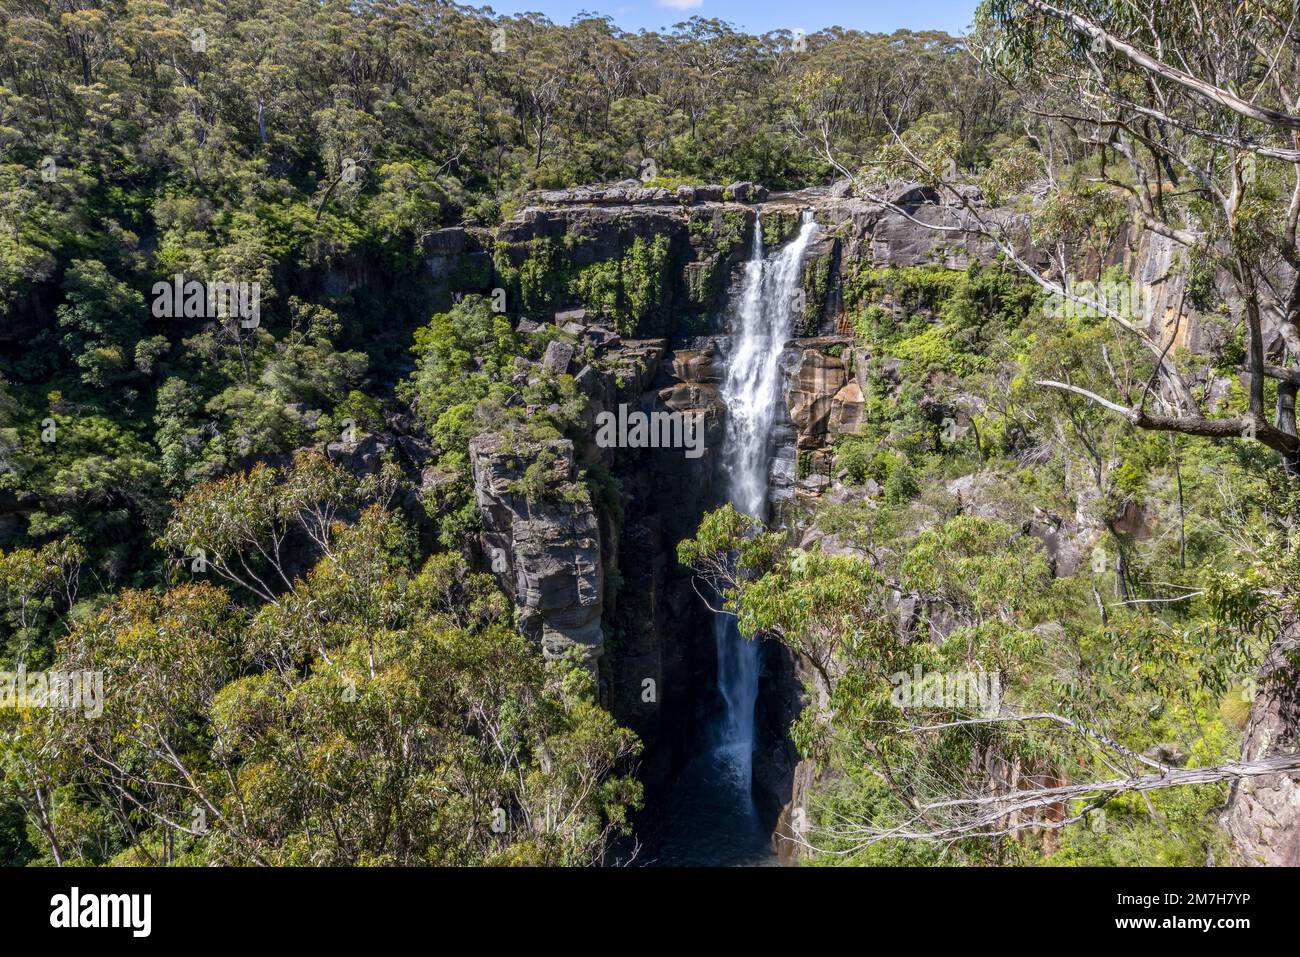 Cascate di Carrington, Southerland Highlands, New South Wales Australia Foto Stock